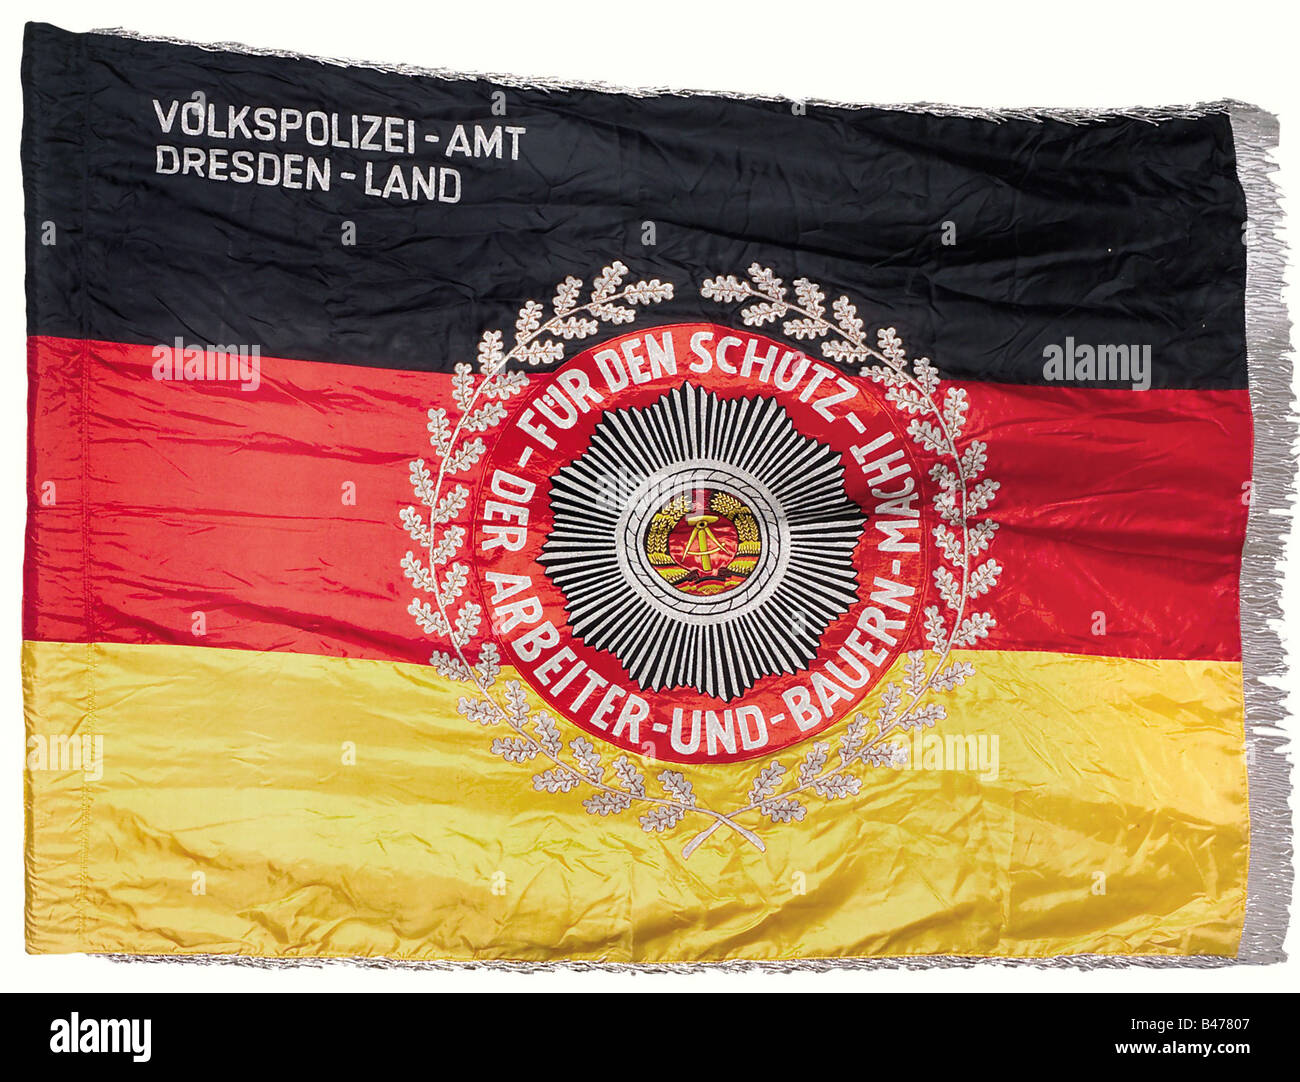 The GDR Volkspolizei., A banner for the Dresden regional office. Silk banner with silver fringe. Inscription on the upper left reads: 'Volkspolizei-Amt Dresden Land' (Volkspolizei Dresden Regional Office) and there is an embroidered national coat of arms on a star 'Für den Schutz der Arbeiter-und-Bauern-Macht' (For the Protection of the Workers and Peasants Power) and with an oak leaf wreath. Ca. 155 x 116 cm. historic, historical, 20th century, GDR, East Germany, Eastern Germany, East-German, East German, object, objects, stills, clipping, cut out, cut-out, cu, Stock Photo